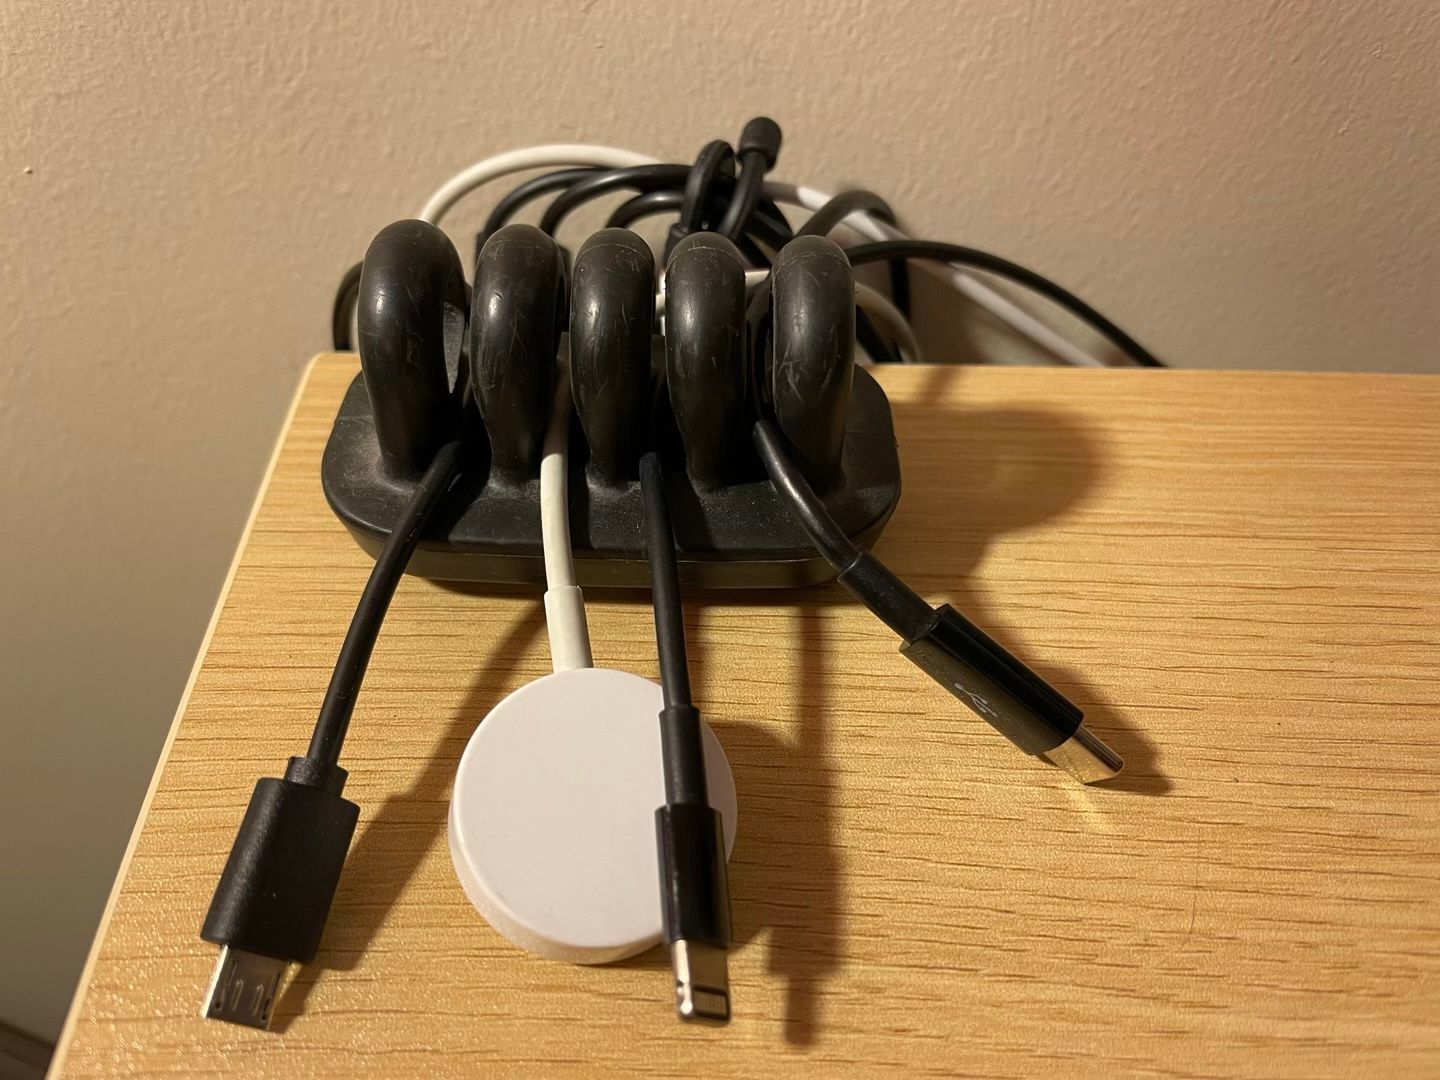 A close-up on the organizer for my charging cables.